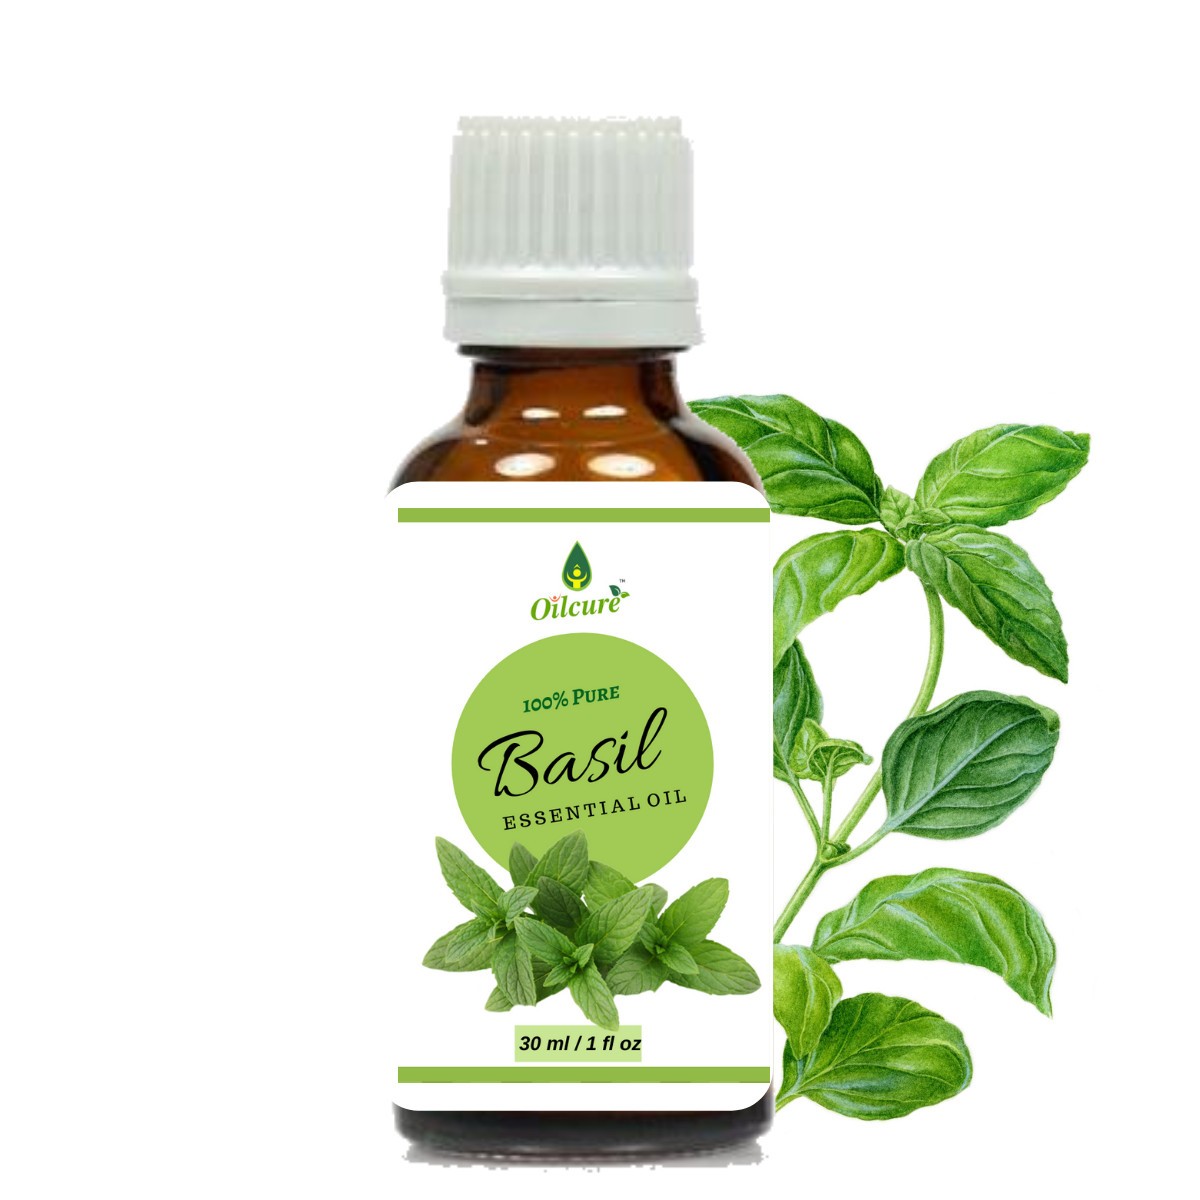 Basil oil has numerous health benefits due to its high content of essential oils and other active compounds,